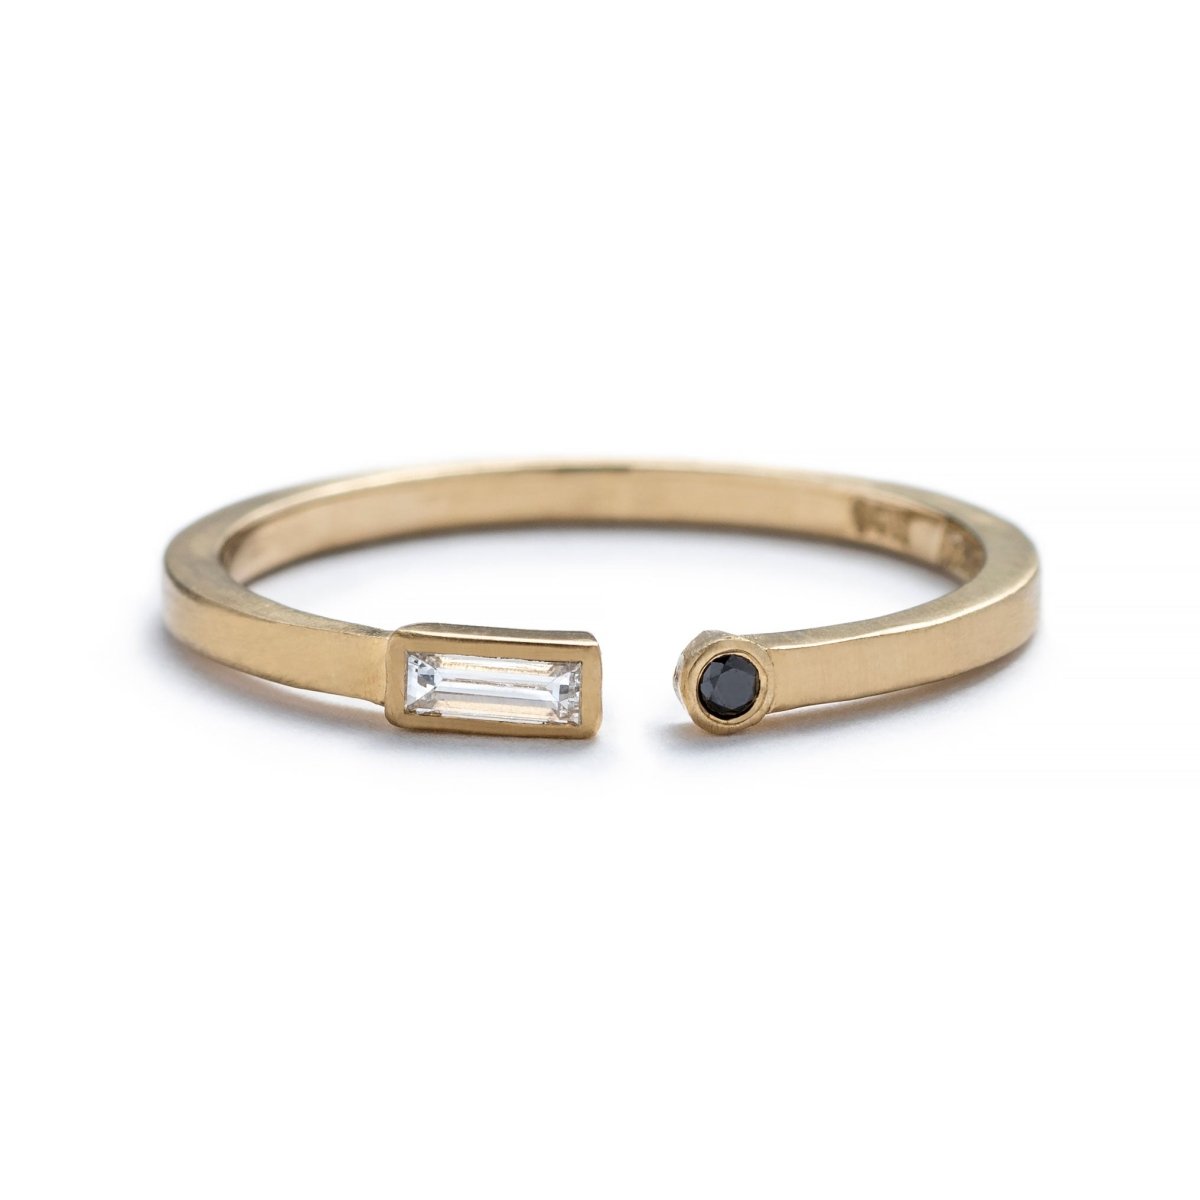 Thin, 14k yellow gold adjustable ring with a matte finish, bezel-set with a small, white diamond baguette on one end, and a small, black, round diamond on the opposite end. Hand-crafted in Portland, Oregon. 